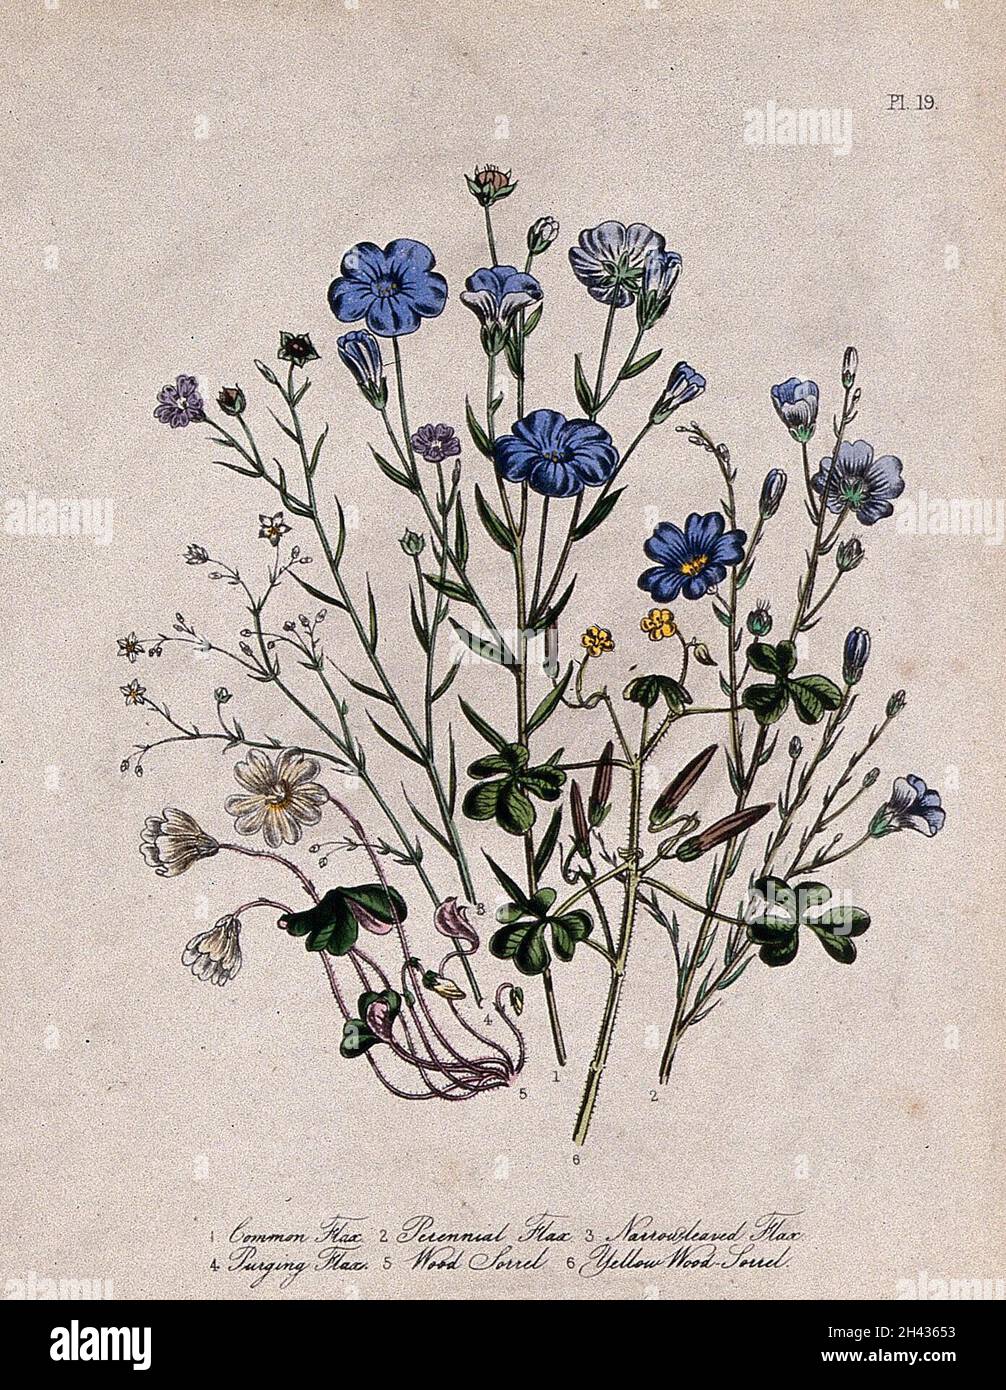 Six British wild flowers, four types of flax (Linum species) and two wood sorrel (Oxalis). Coloured lithograph, c. 1846, after H. Humphreys. Stock Photo